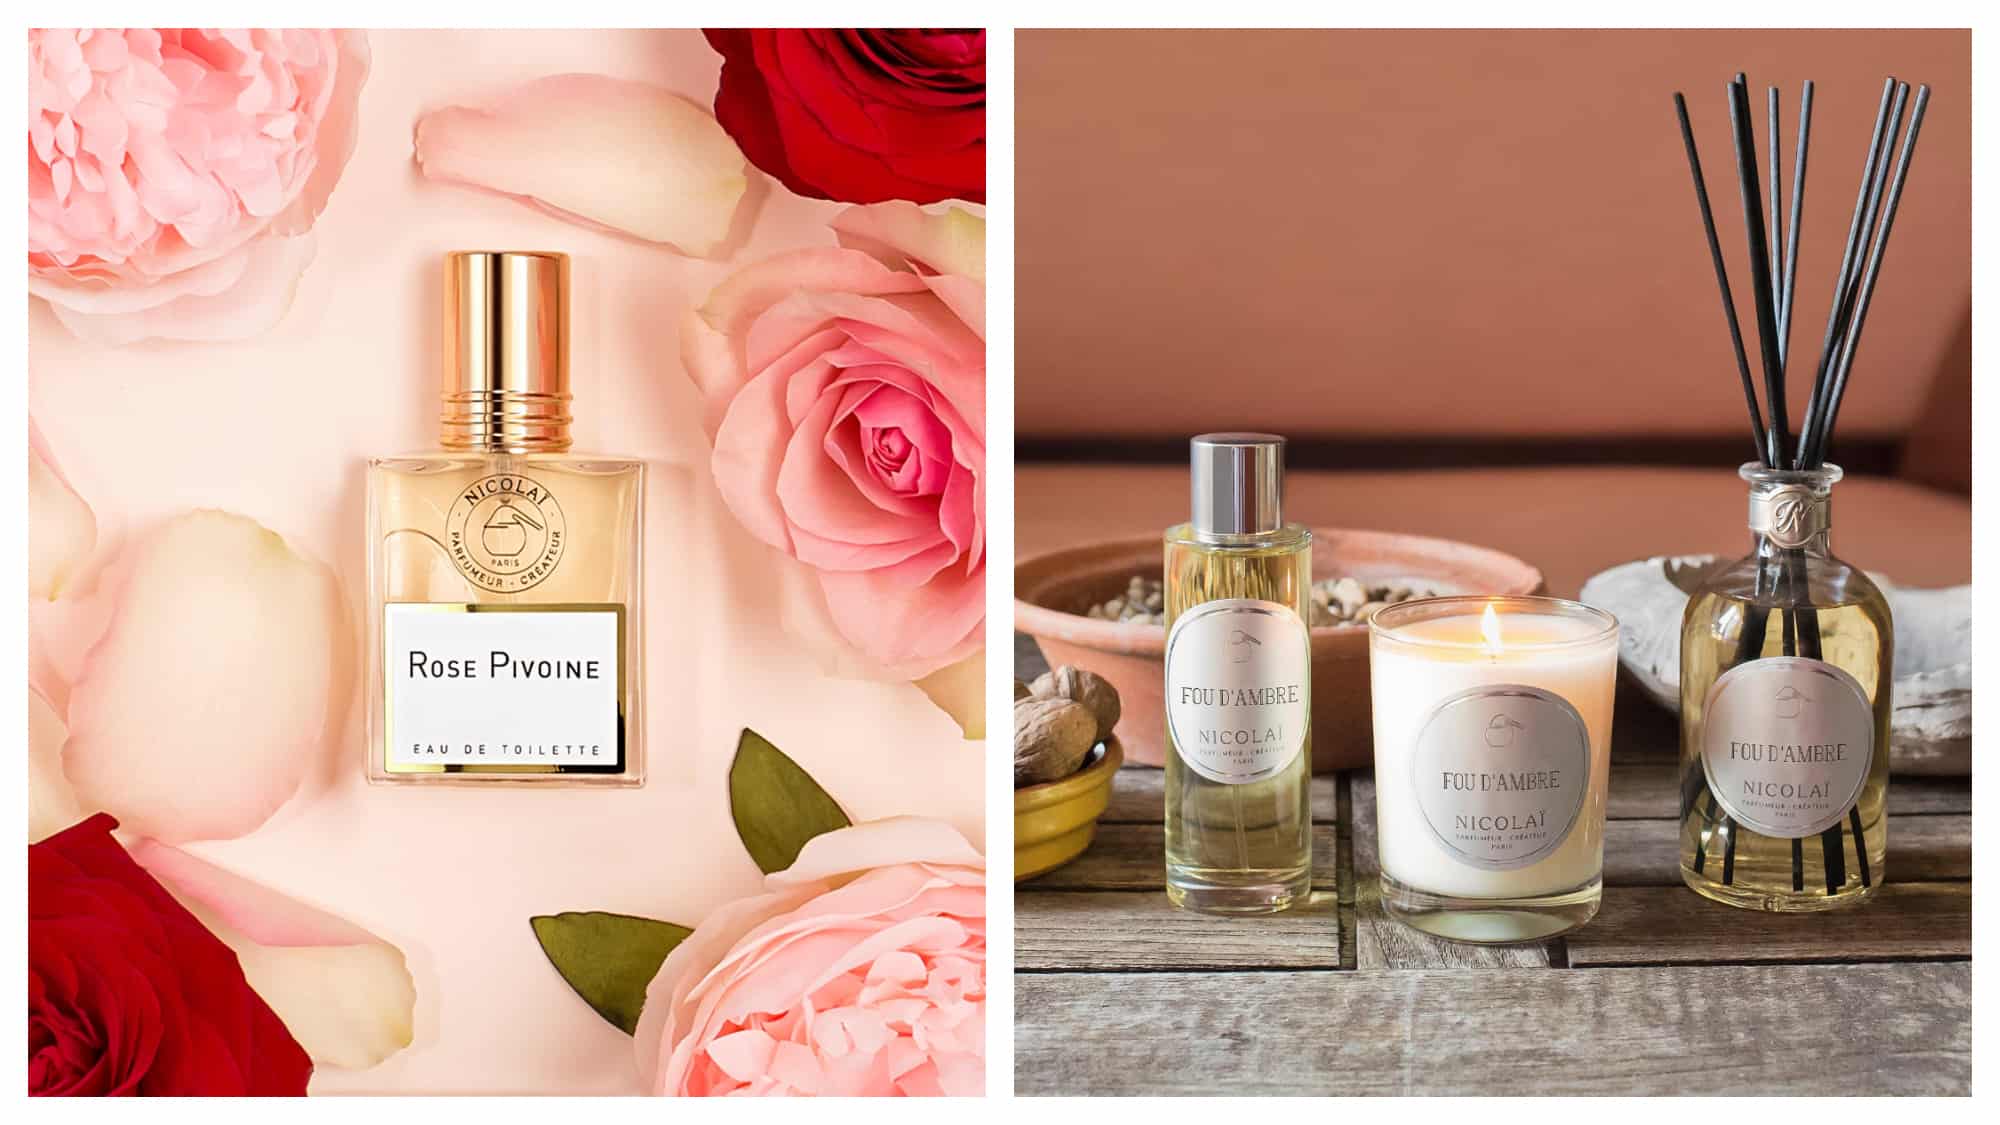 On left: An elegant bottle of perfume, called "rose pivoine," lays surrounded by pink peonies and roses. It is a scent created by Nicolaï, a 30-year old perfumery founded by the great-granddaughter of Pierre Guerlain. On right: A trio of perfume, a candle, and a diffuser in the scent "Fou d'Ambre" were created by the perfumery Nicolaï, whose laboratory is located on the rue de Richelieu in Paris. 